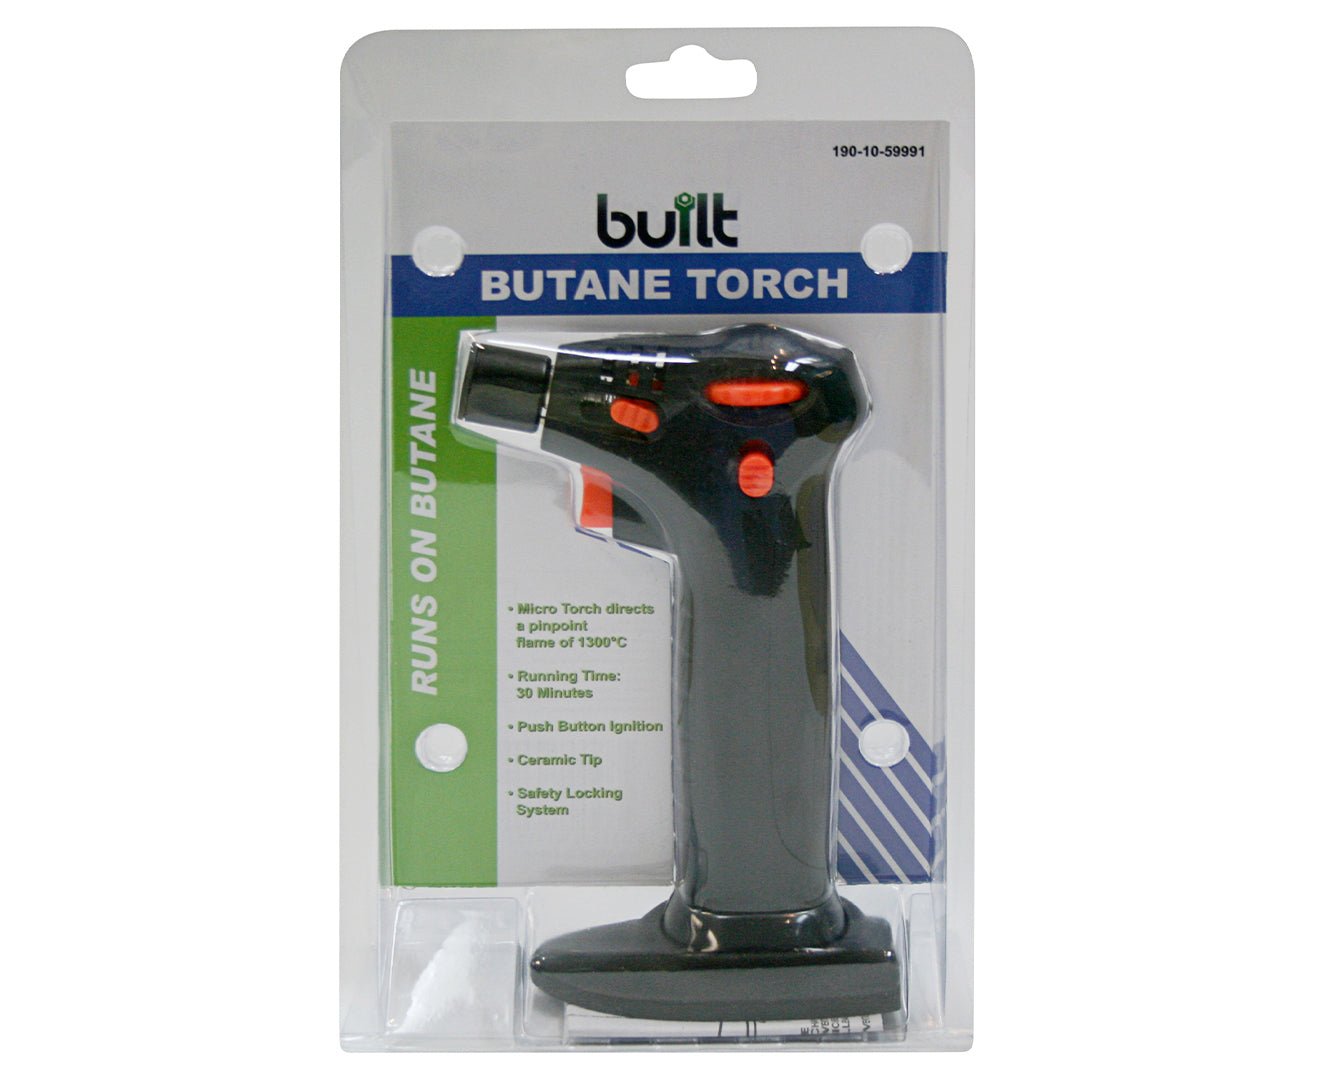 BUILT Professional Butane Torch 190-10-59991 - Double Bay Hardware